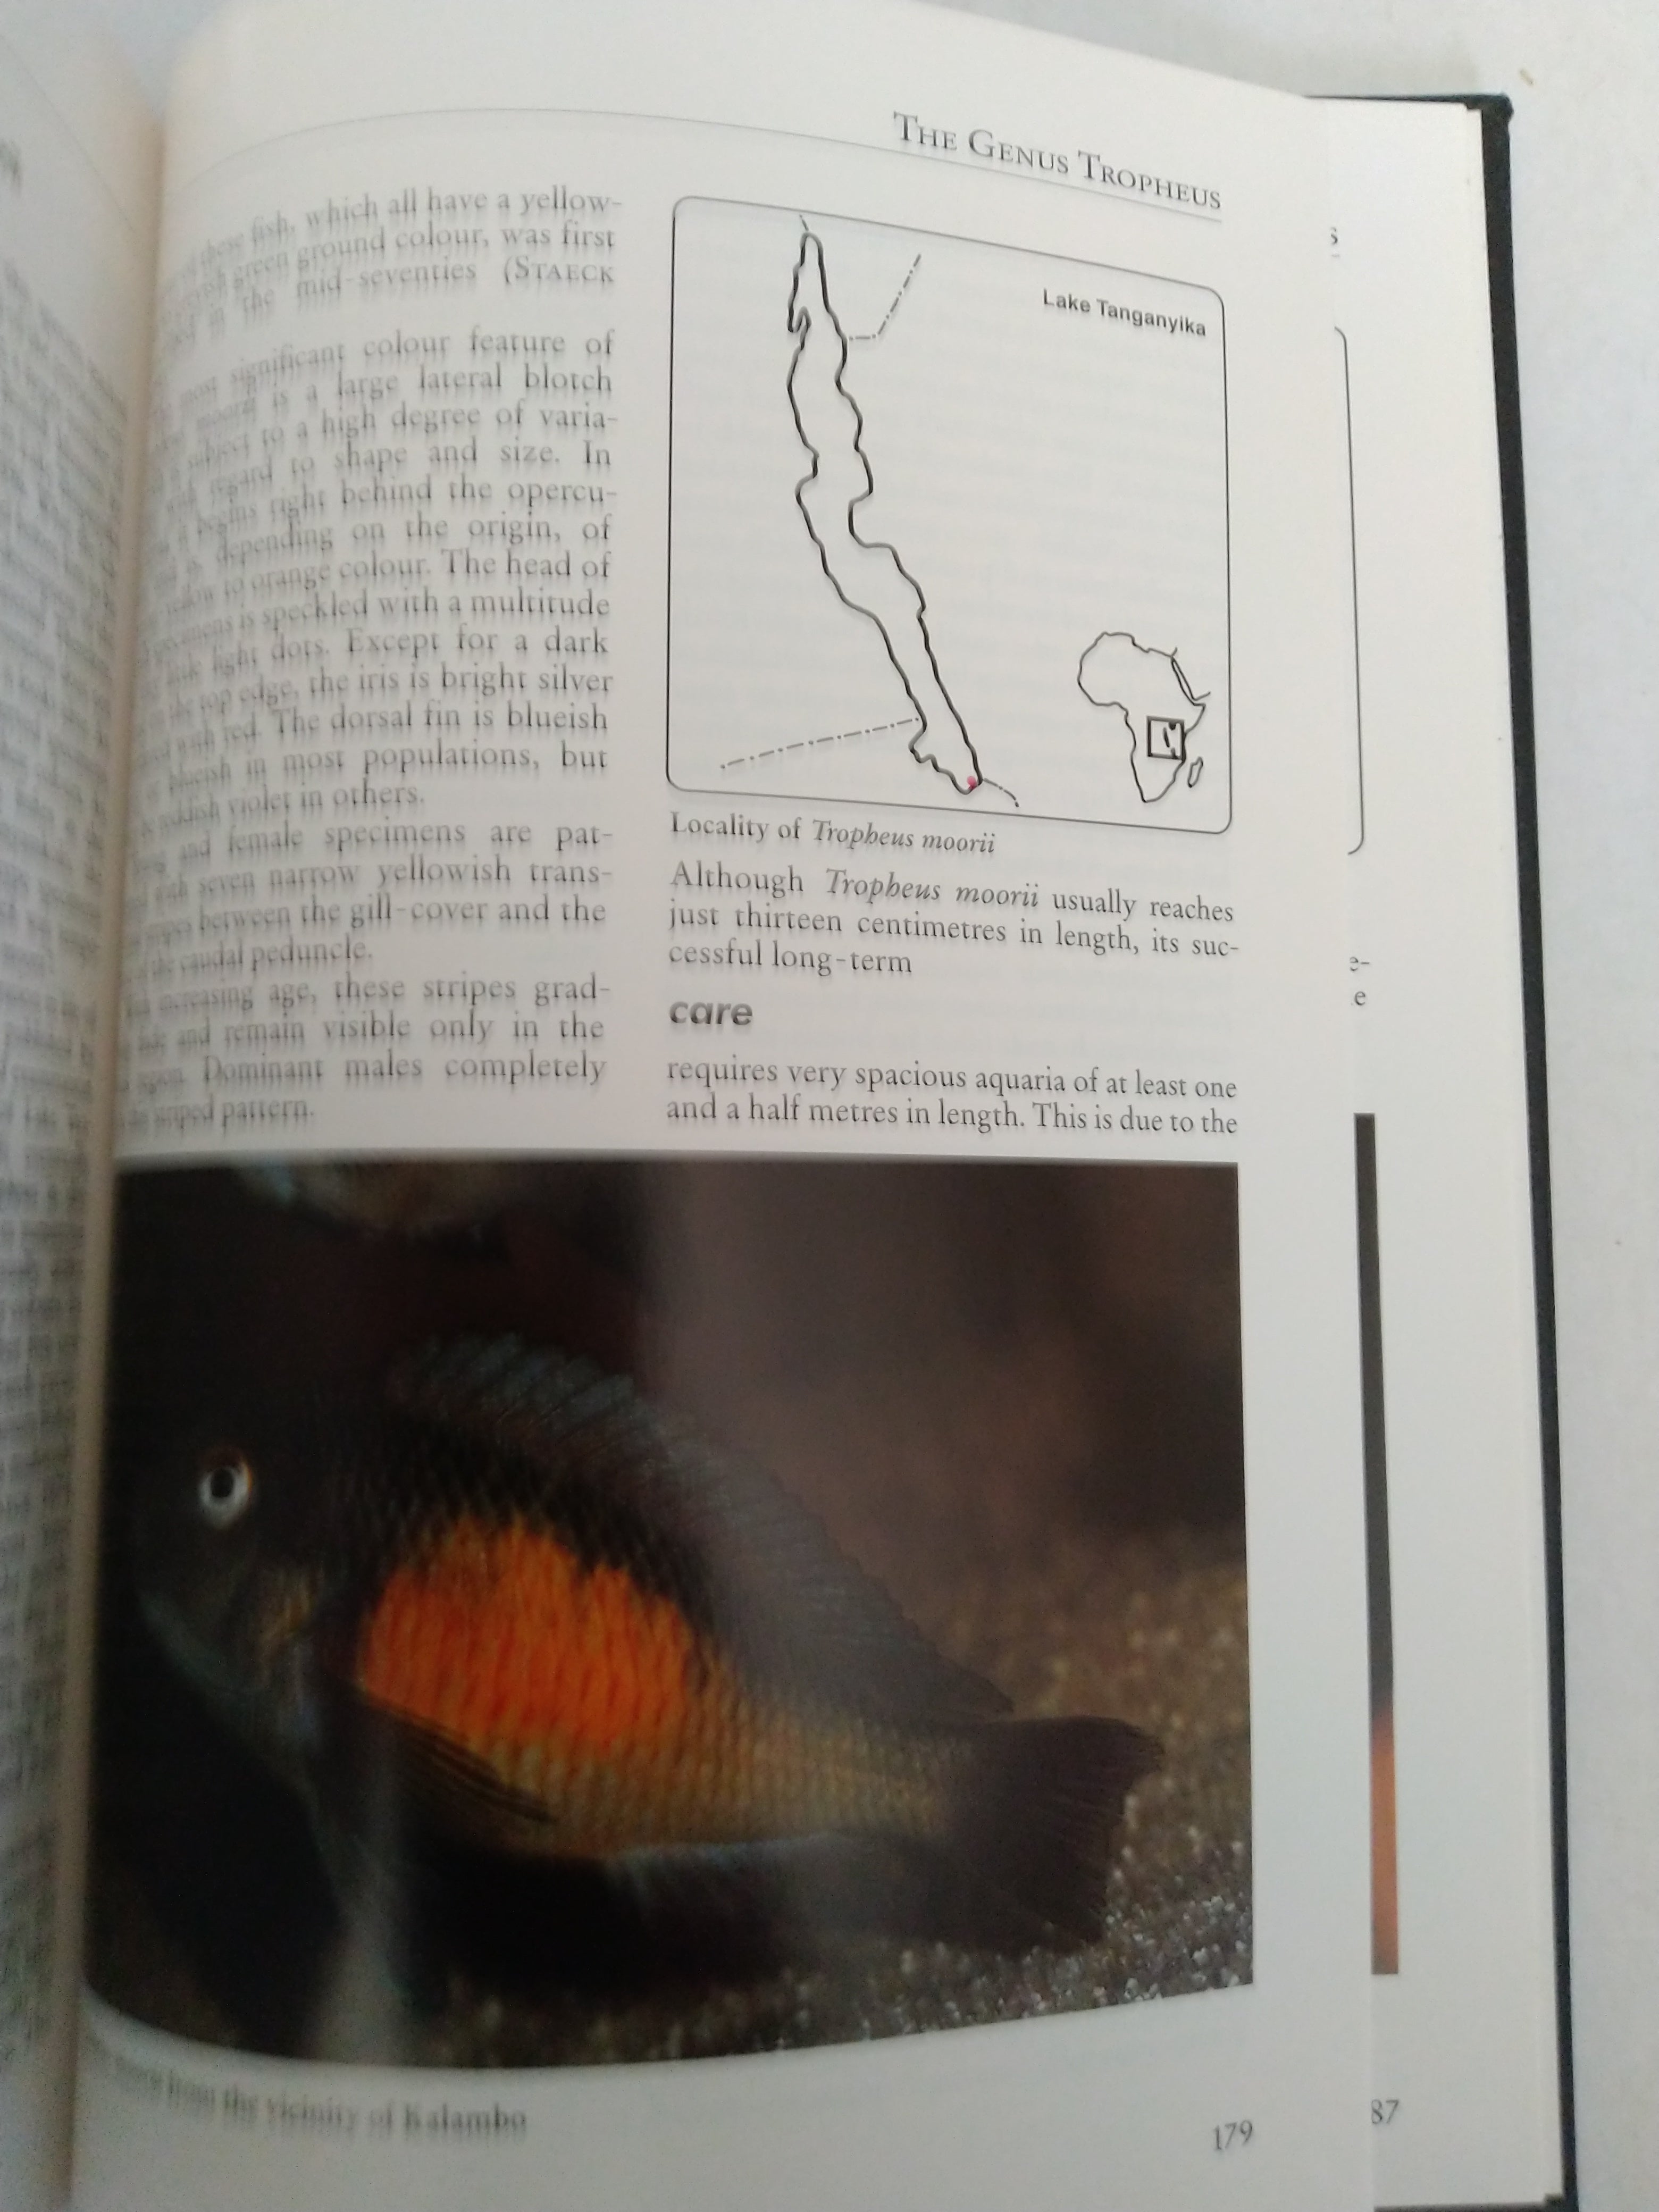 African Cichlids II: Cichlids from Eastern Africa : A Handbook for Their Identification, Care and Breeding by Wolfgang Staeck & Horst Linke